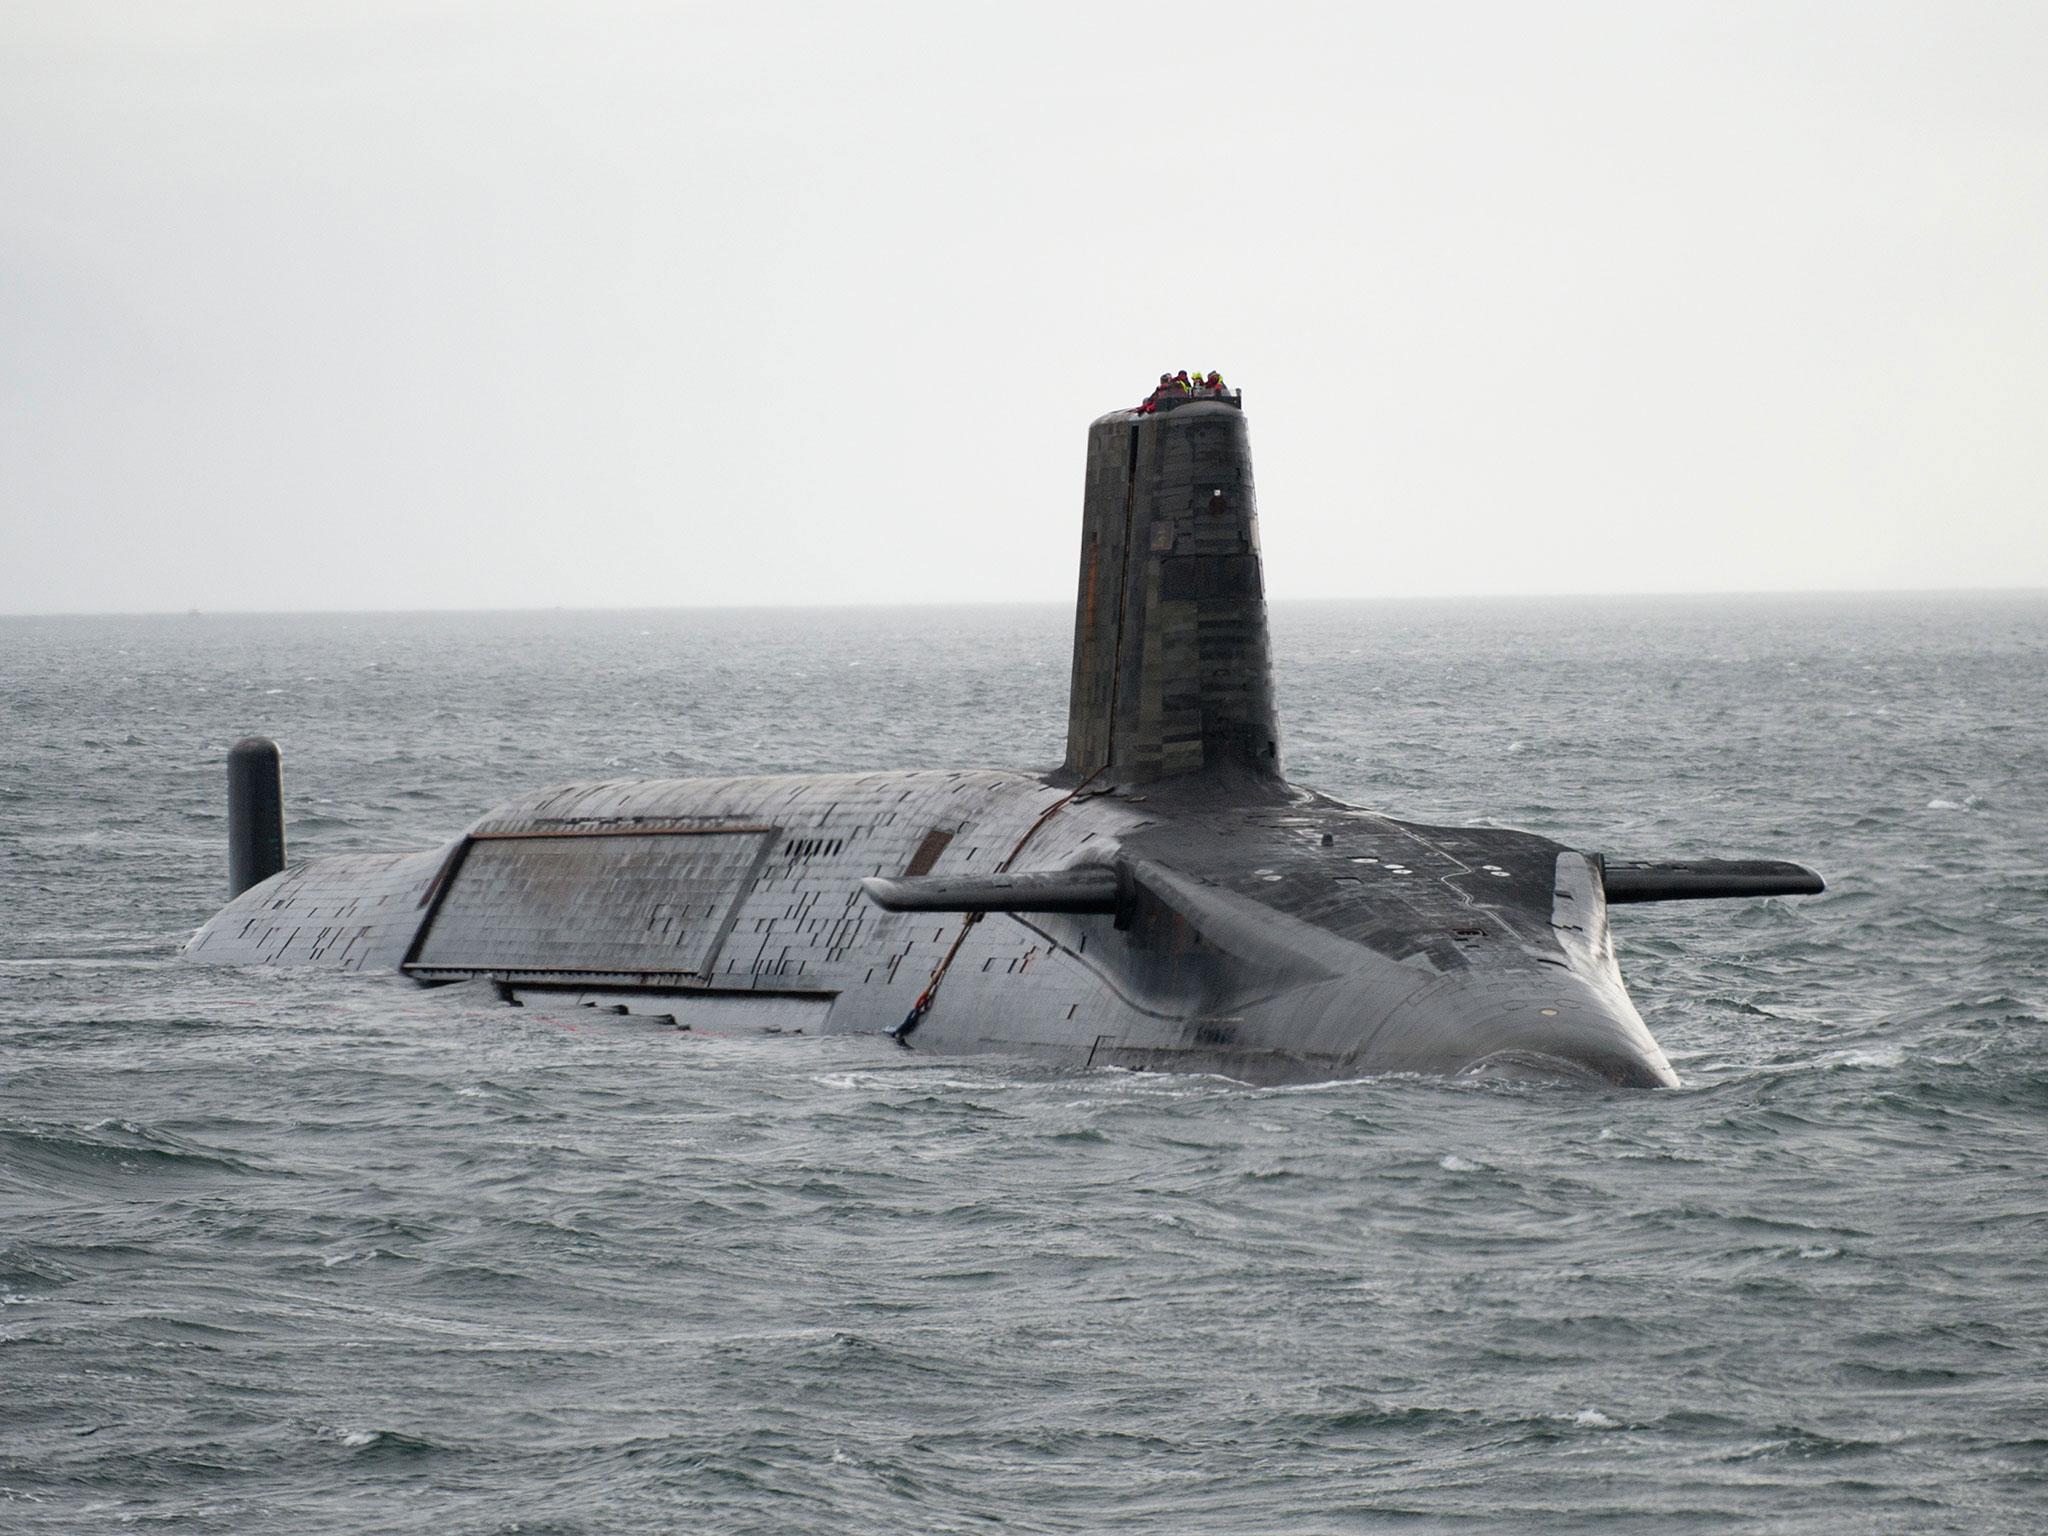 HMS Vengeance carries the Trident ballistic missile, the UK's nuclear deterrent